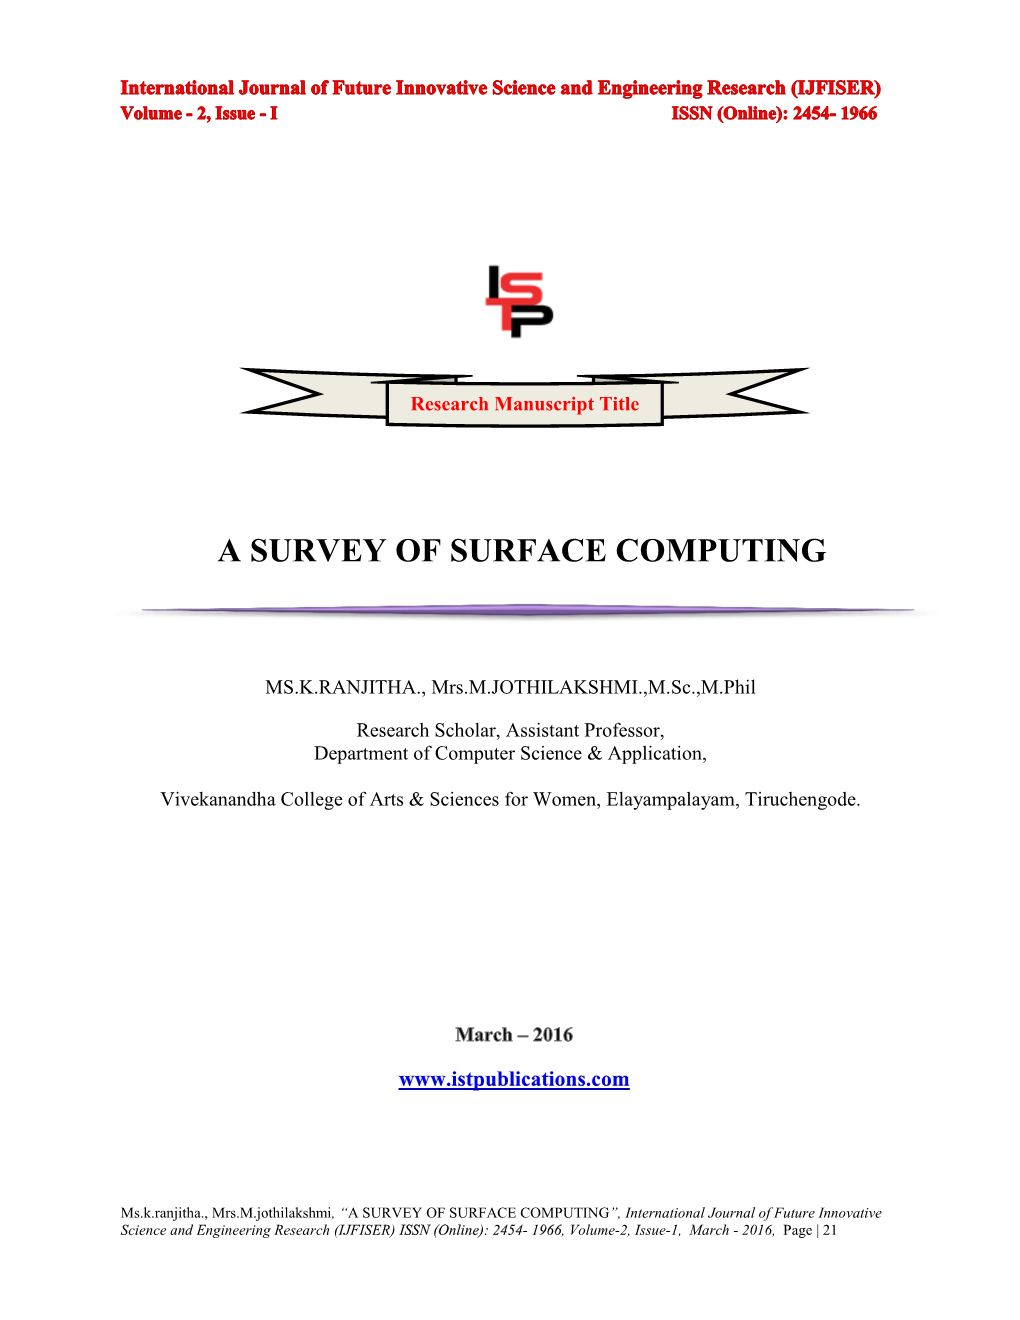 A Survey of Surface Computing